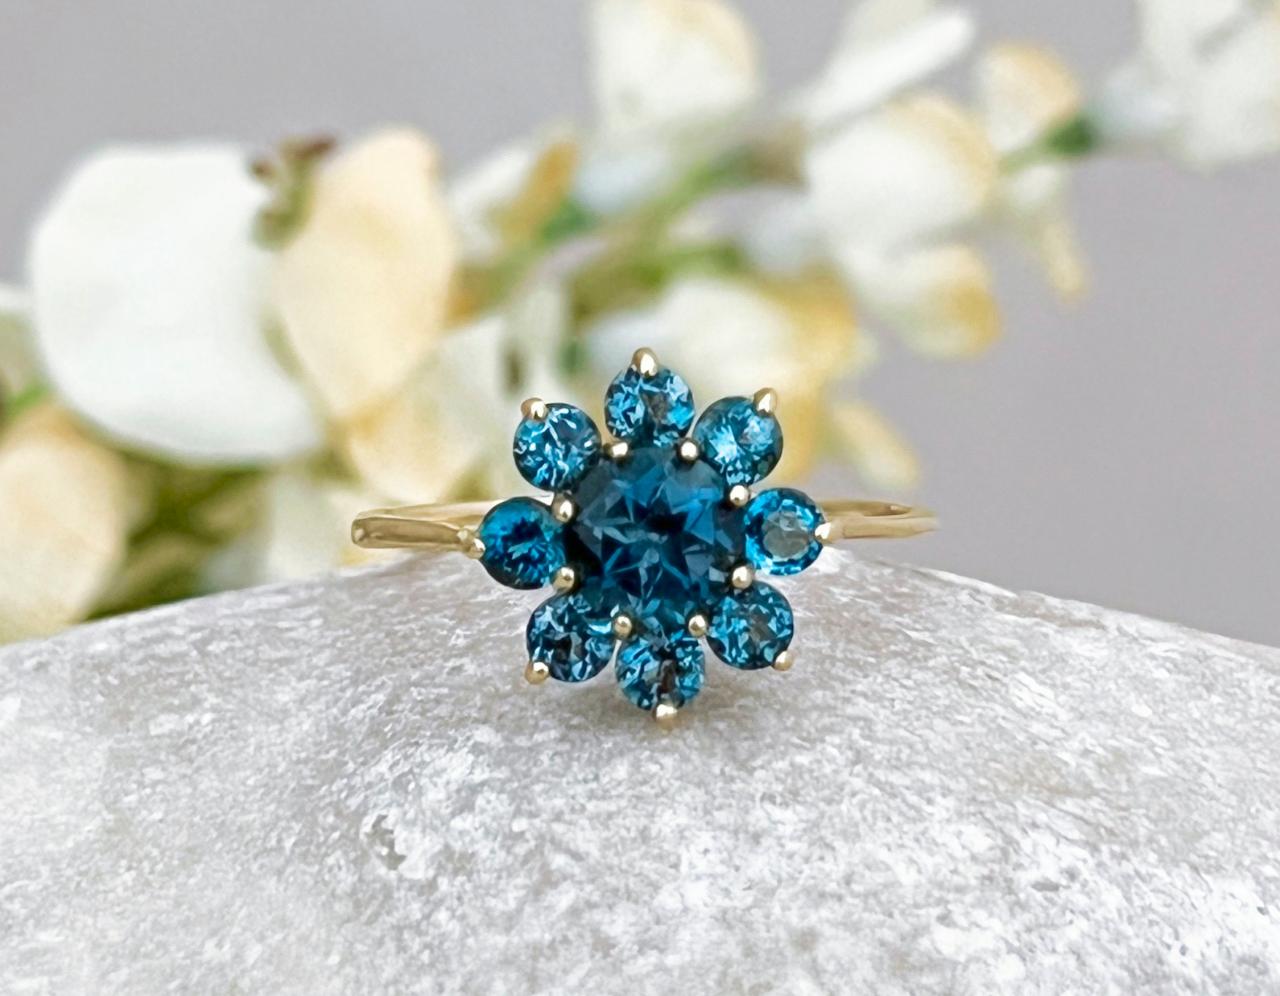 Floral Shape Solid Gold Engagement Ring With London Blue Topaz, Halo ...